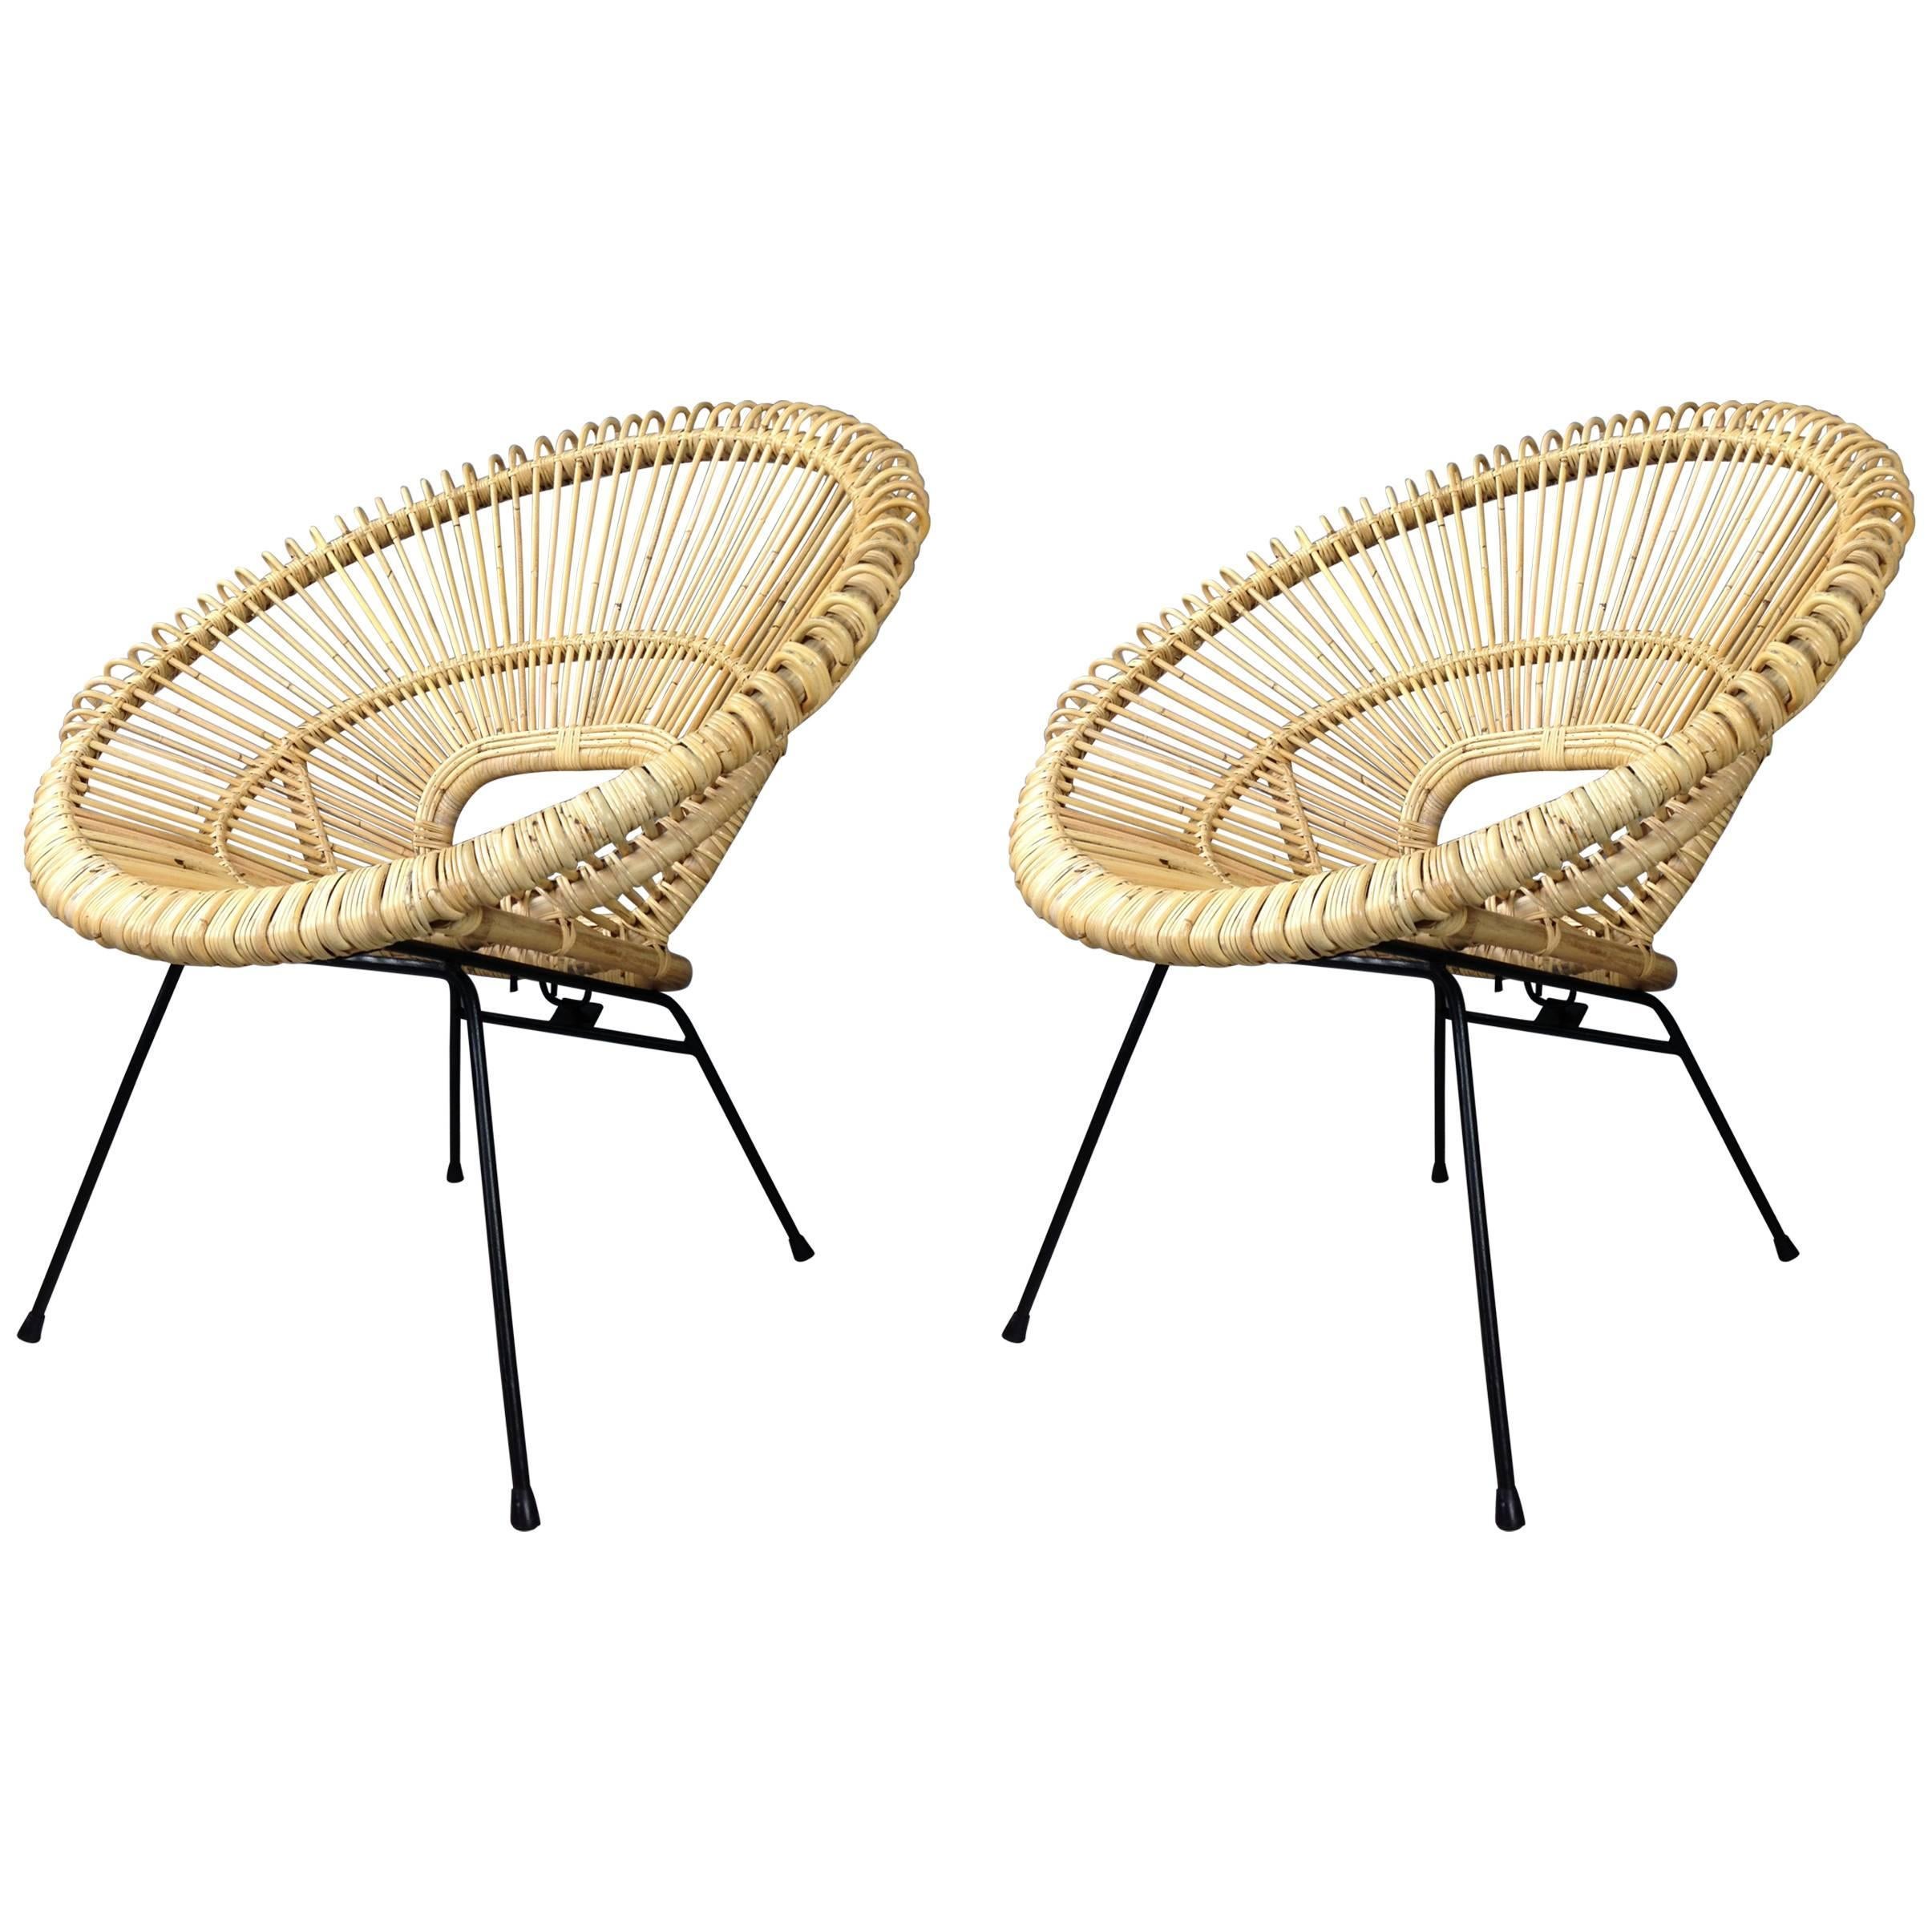 1950s design style rattan and black metal pair of lounger armchairs at the manner of Janine Abraham and Dirk Jan Rol.
  